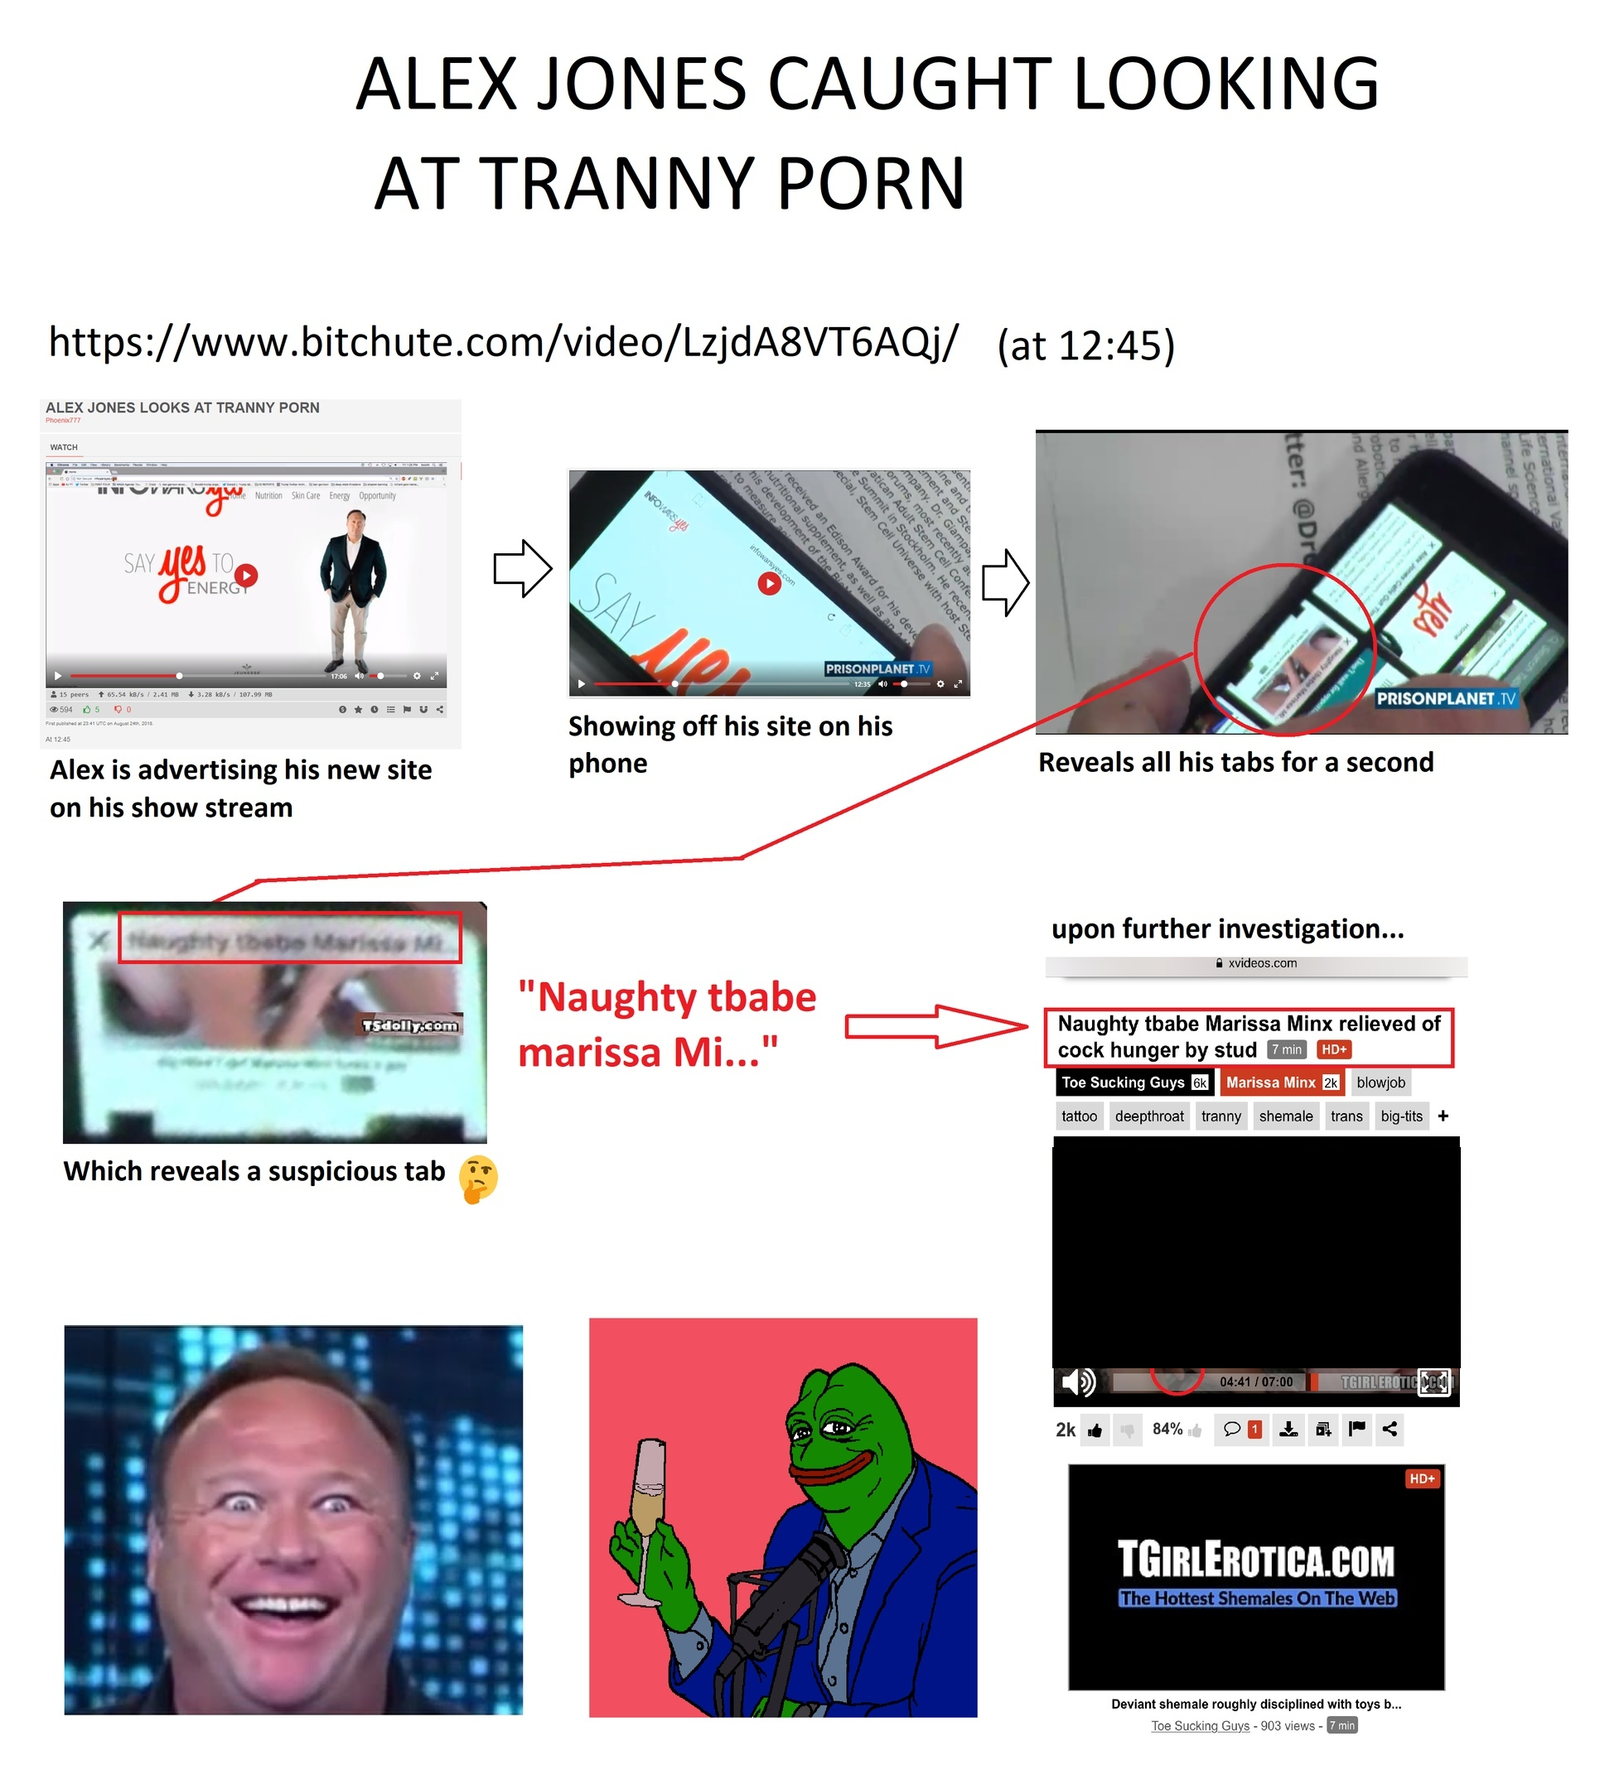 Famous conspiracy theorist and homophobe Alex Jones was caught watching pornography with transvestites - Conspiracy, Homophobia, 4chan, media, Media and press